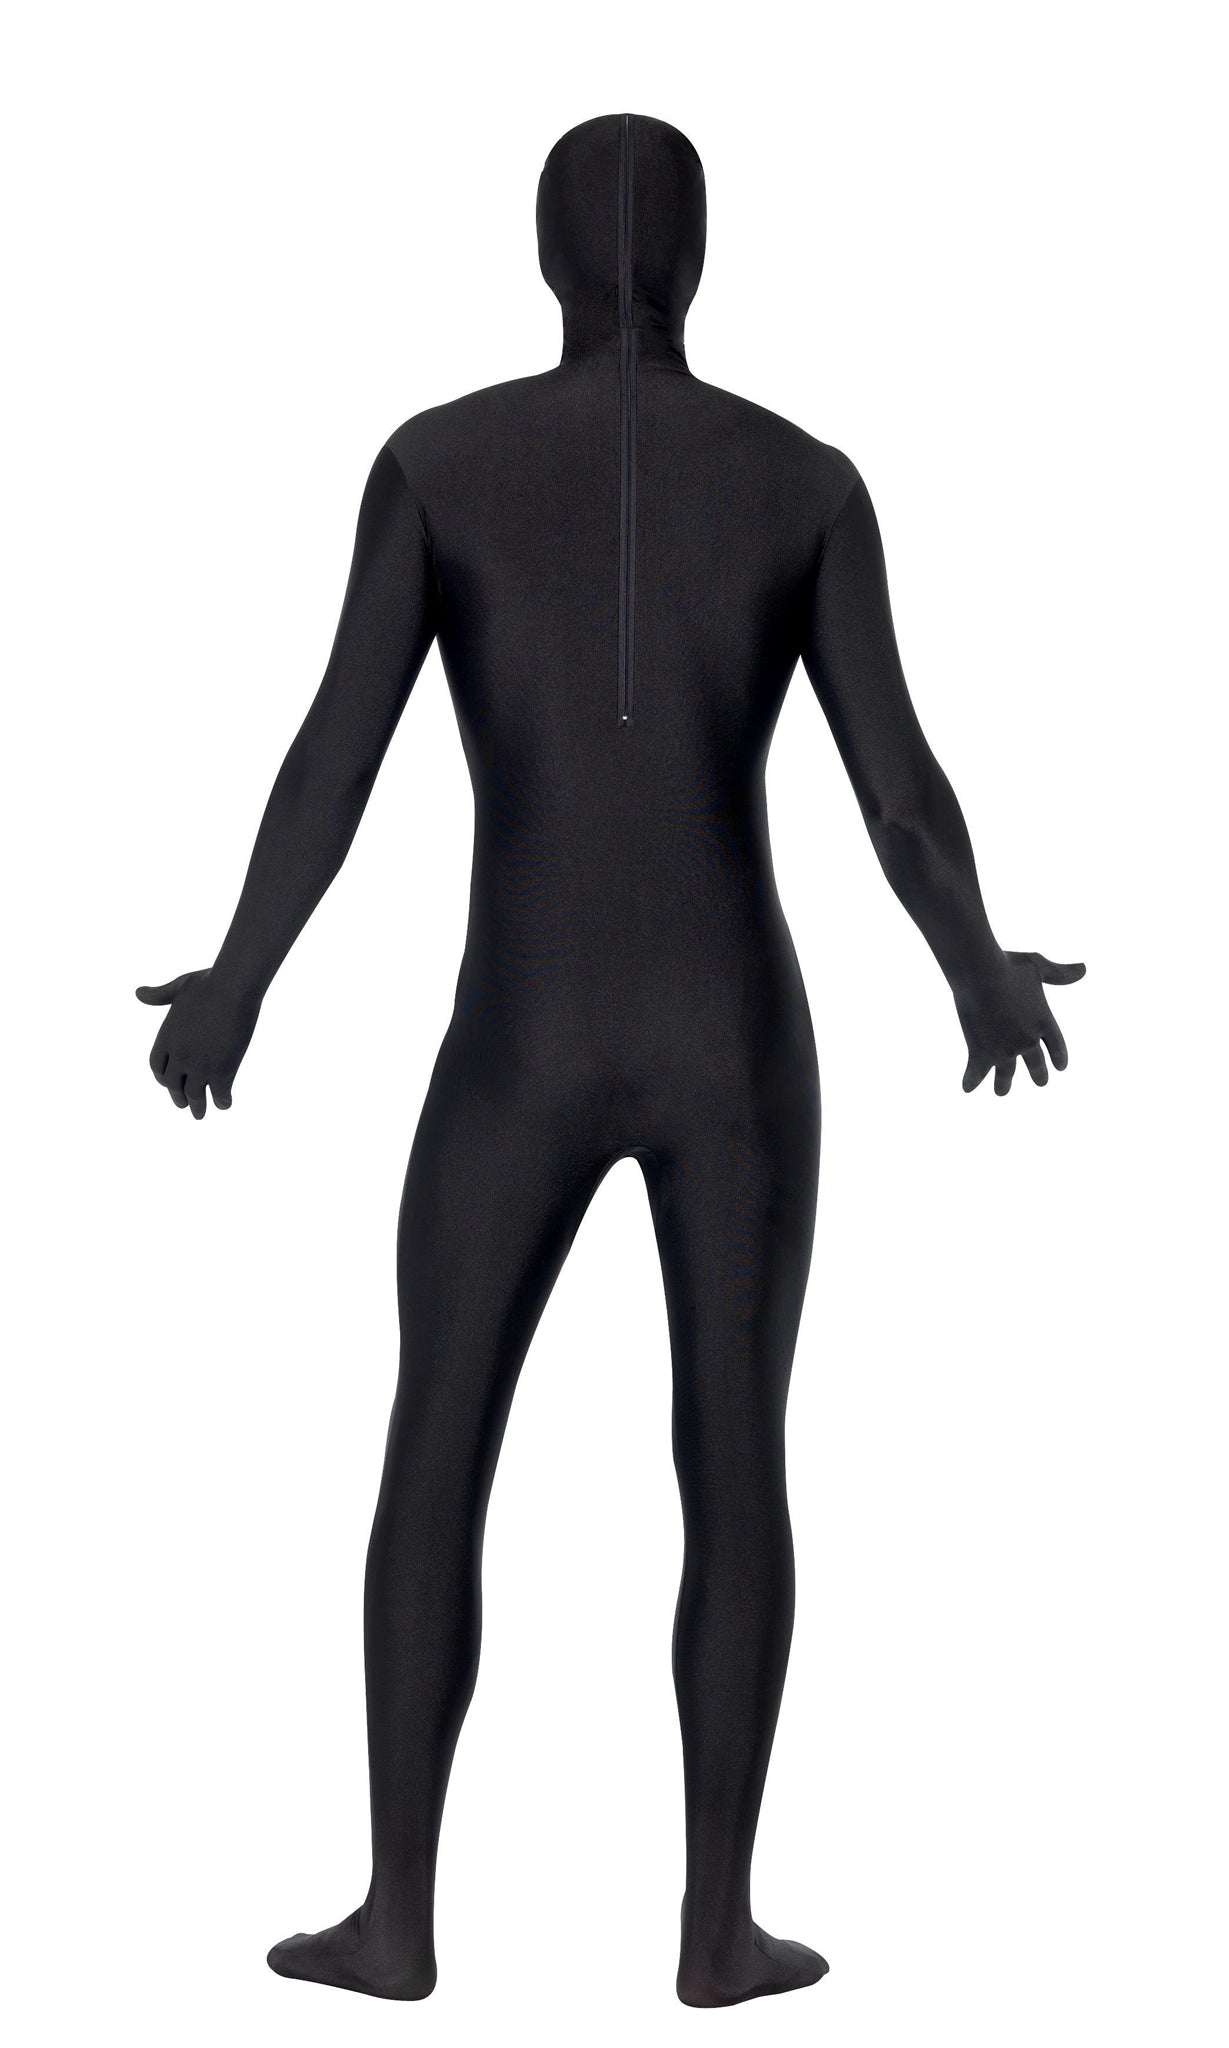 Back of morph suit style gangster costume with gun shots